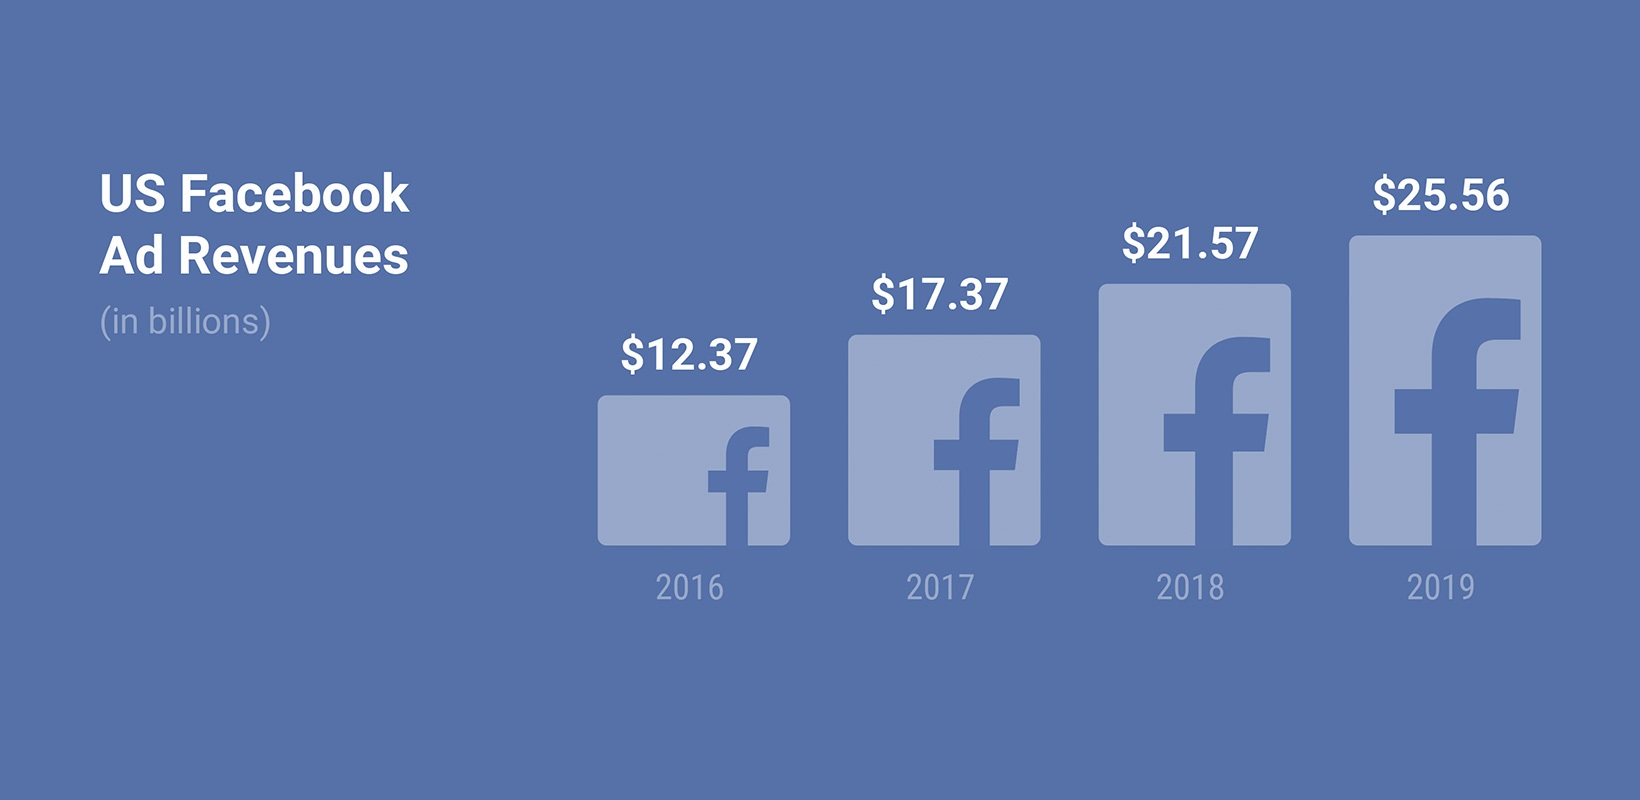 Facebook ad revenues have climbed each year